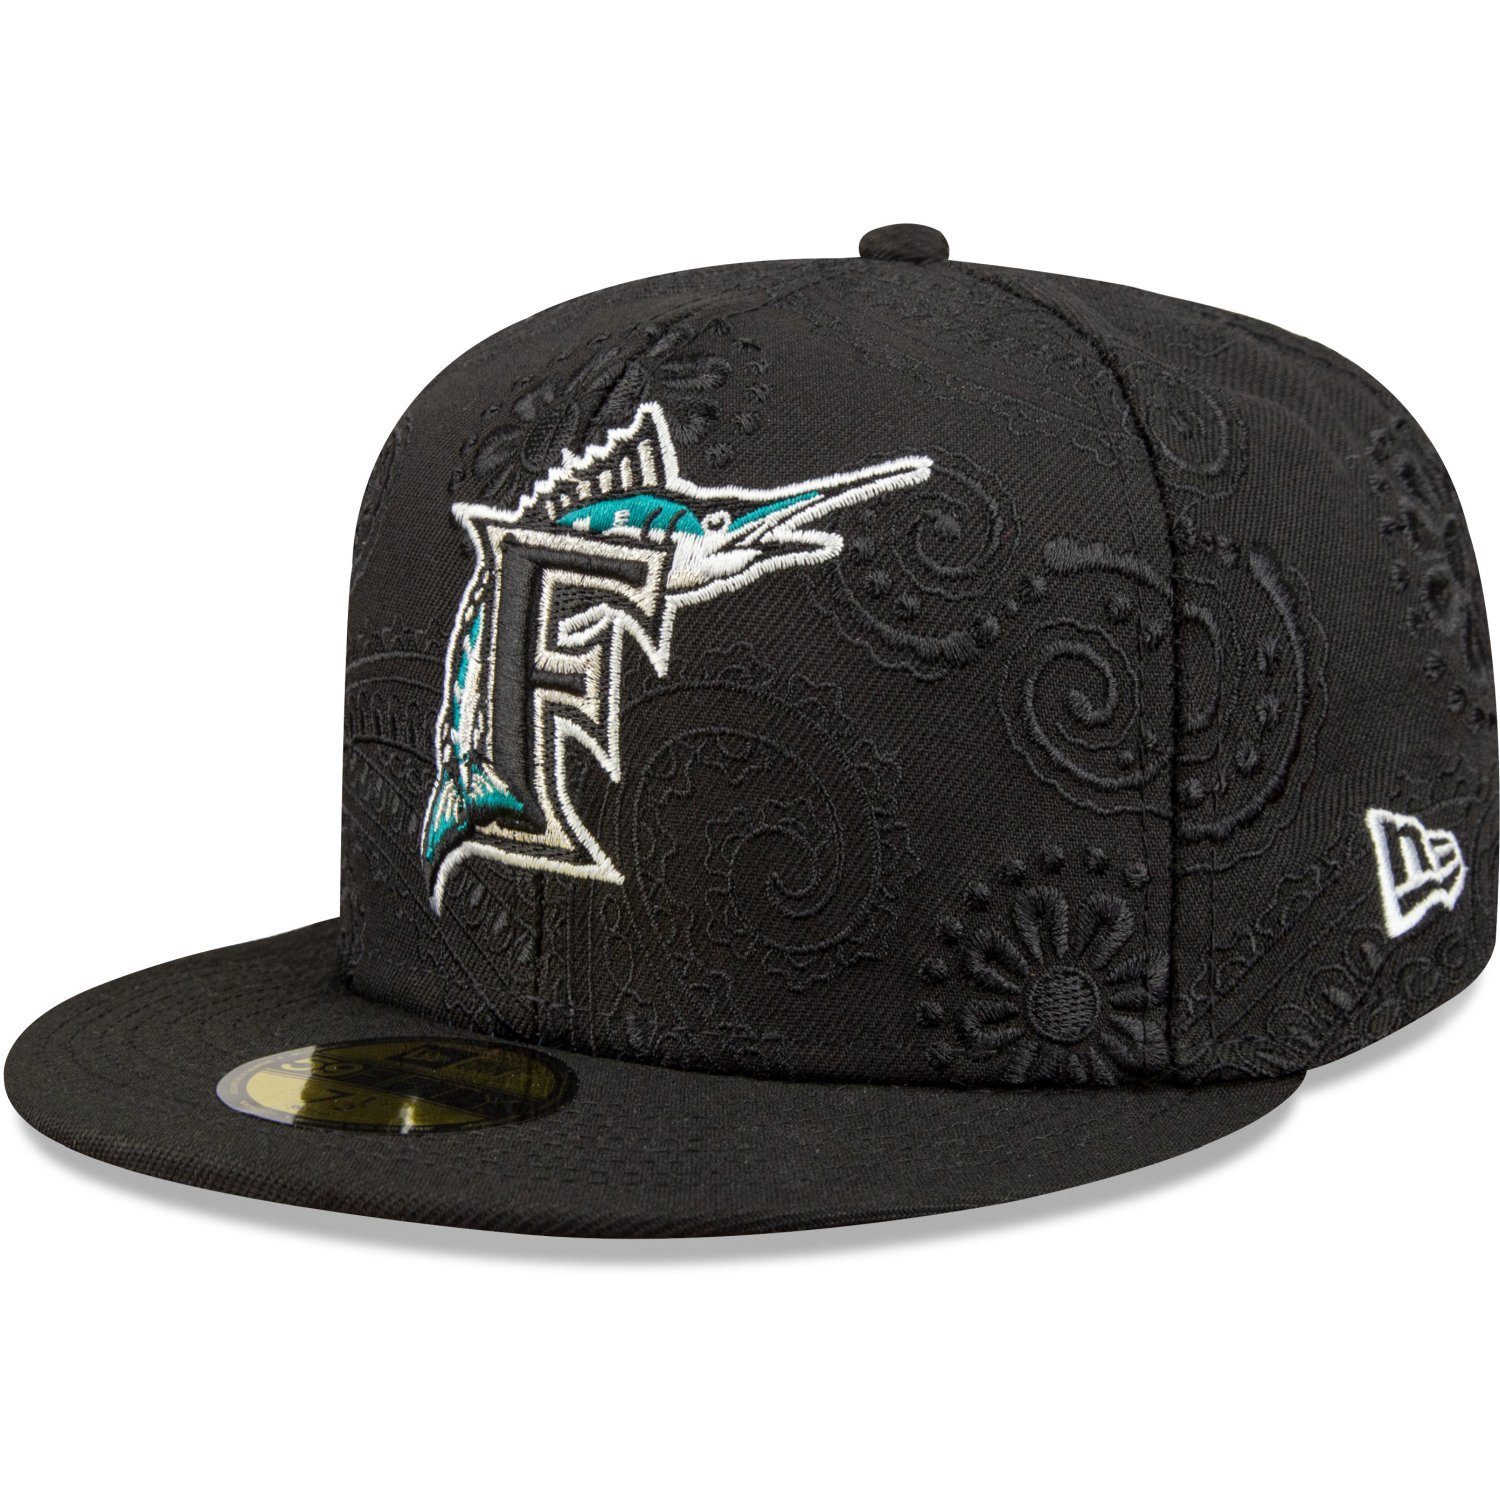 New Era Fitted Cap 59Fifty SWIRL PAISLEY Miami Marlins